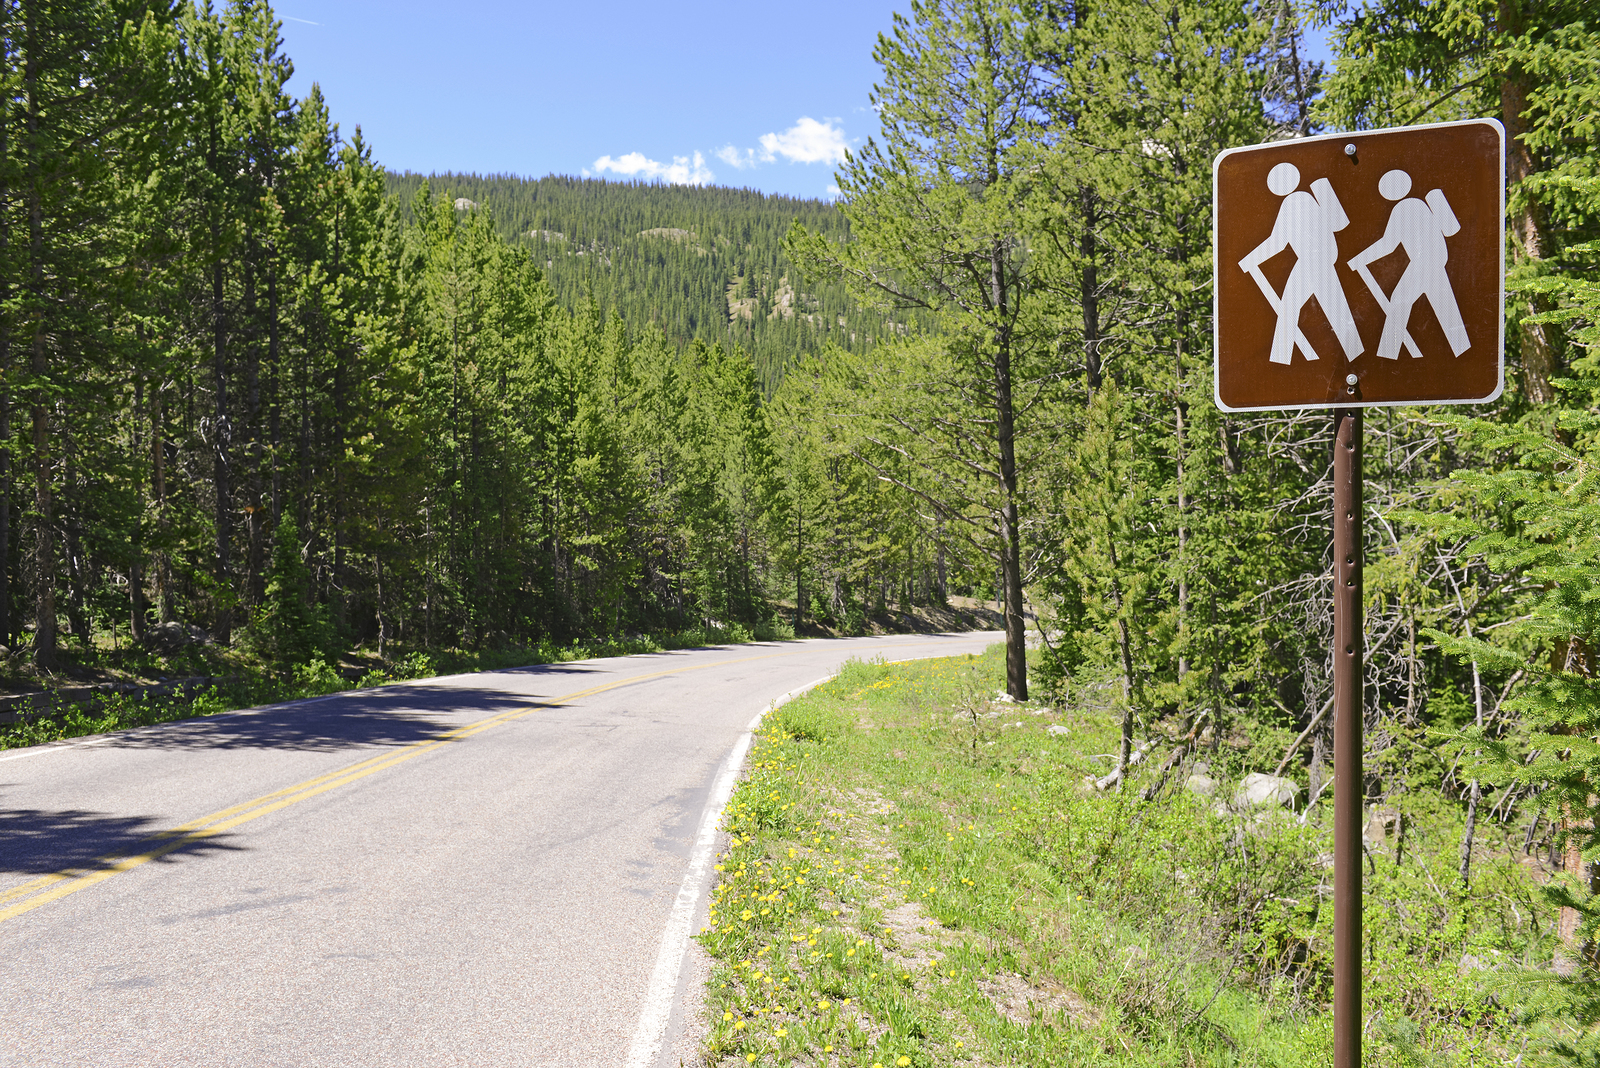 Hiker - backpacker Crossing sign in the outdoors